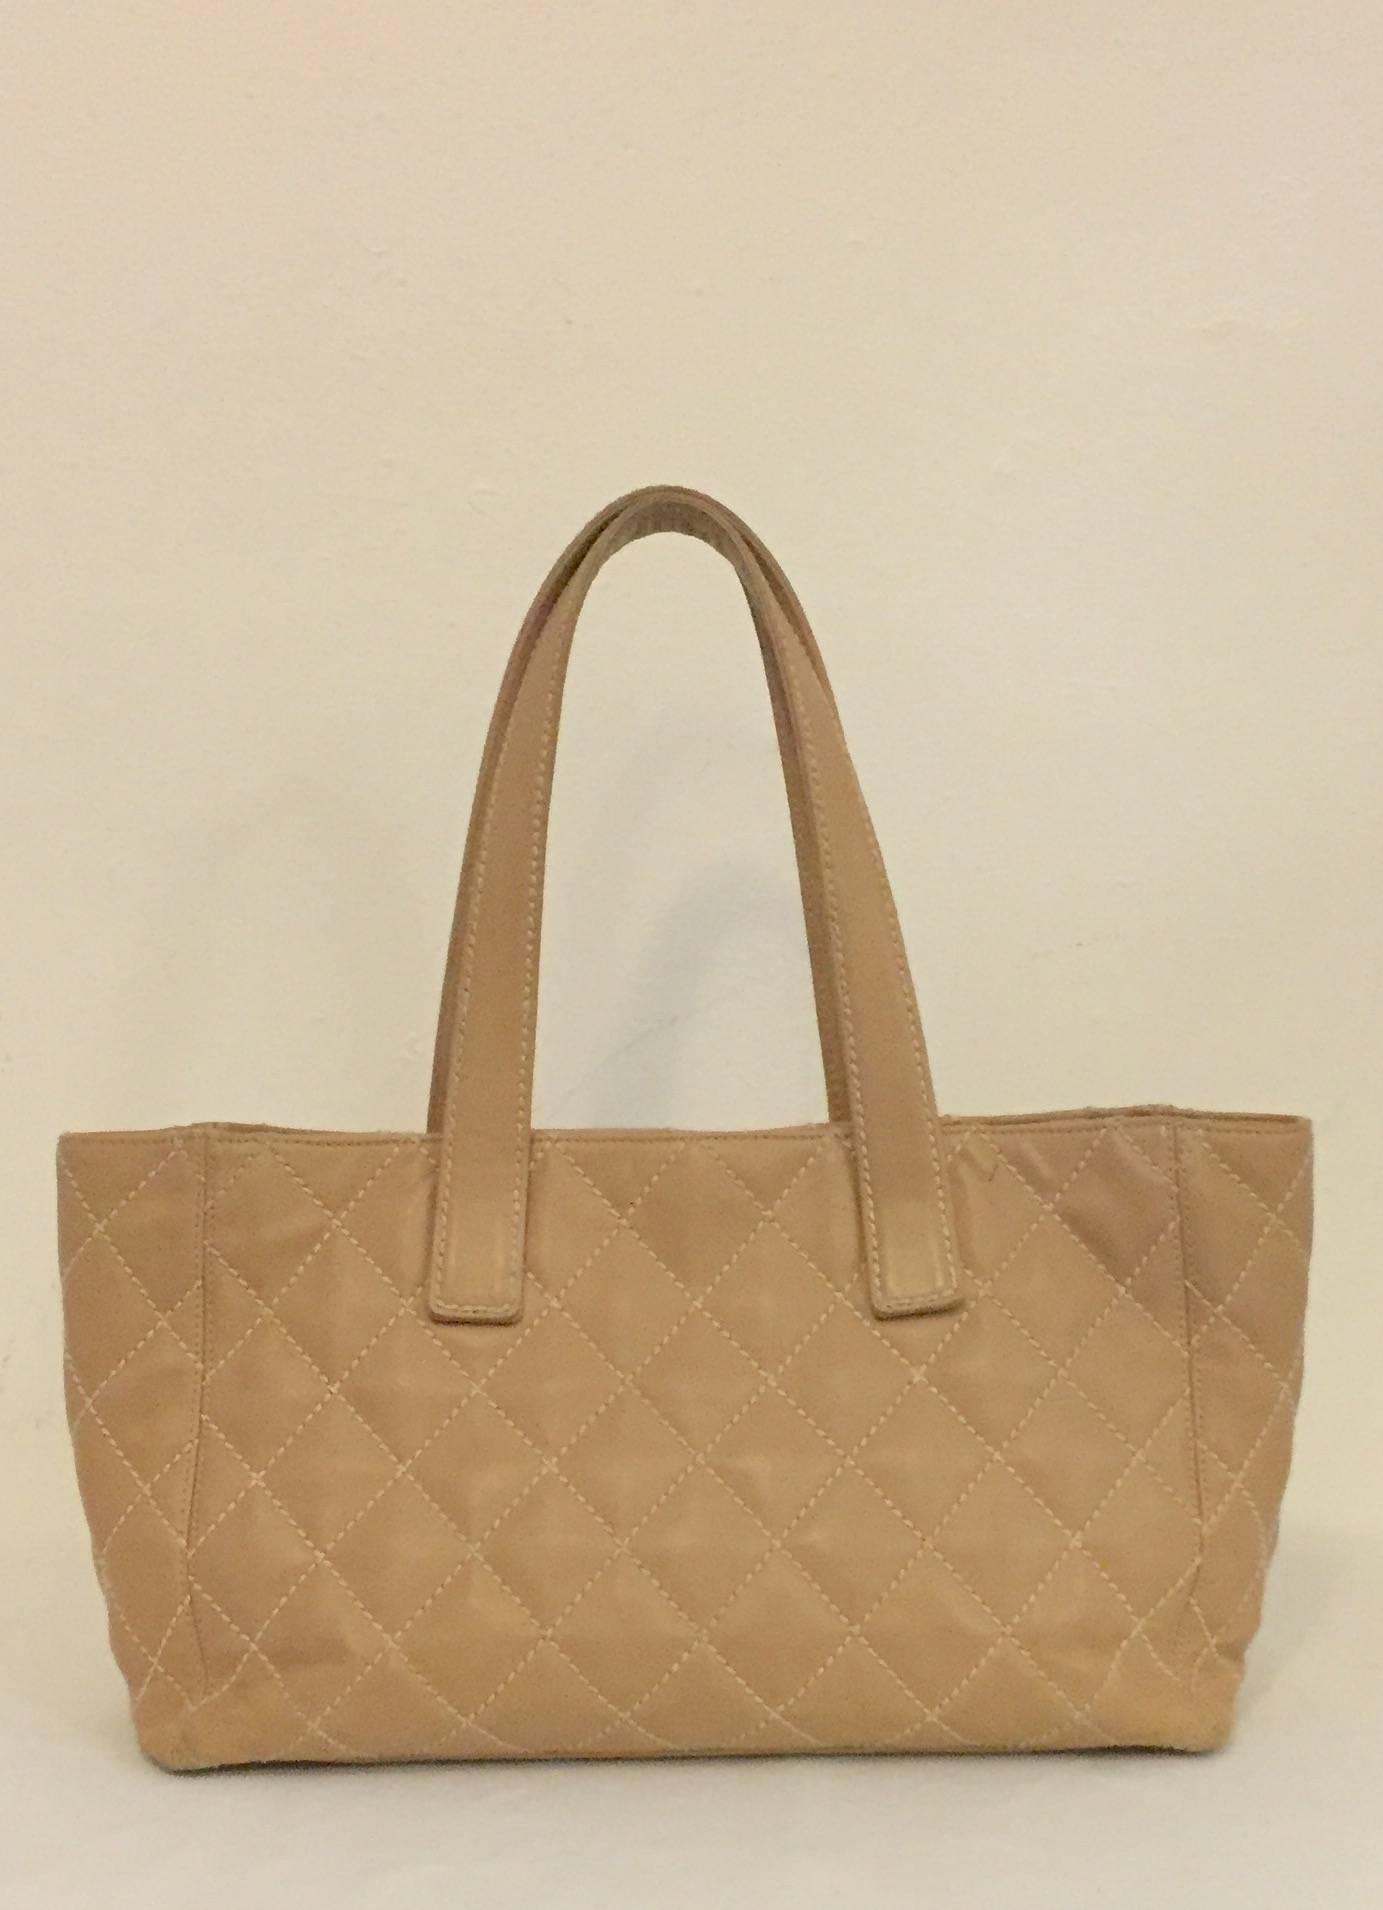 Women's Chanel Tan Diamond Quilted Leather Tote W Contrast Stitching Serial 8068065